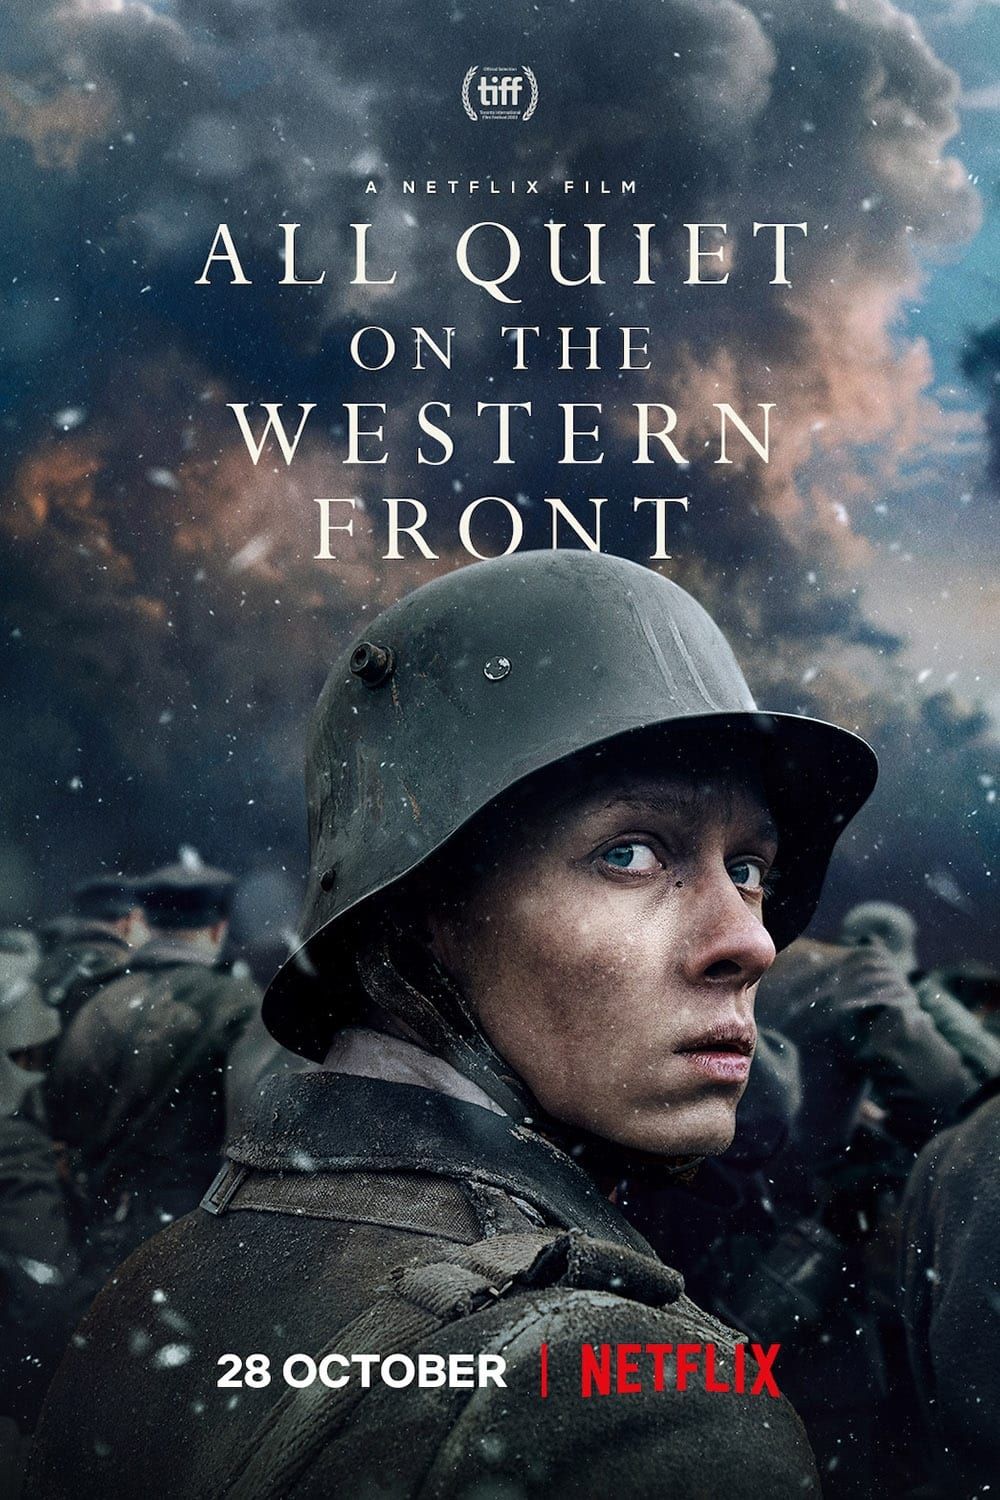 All Quiet on the Western Front Netflix Poster